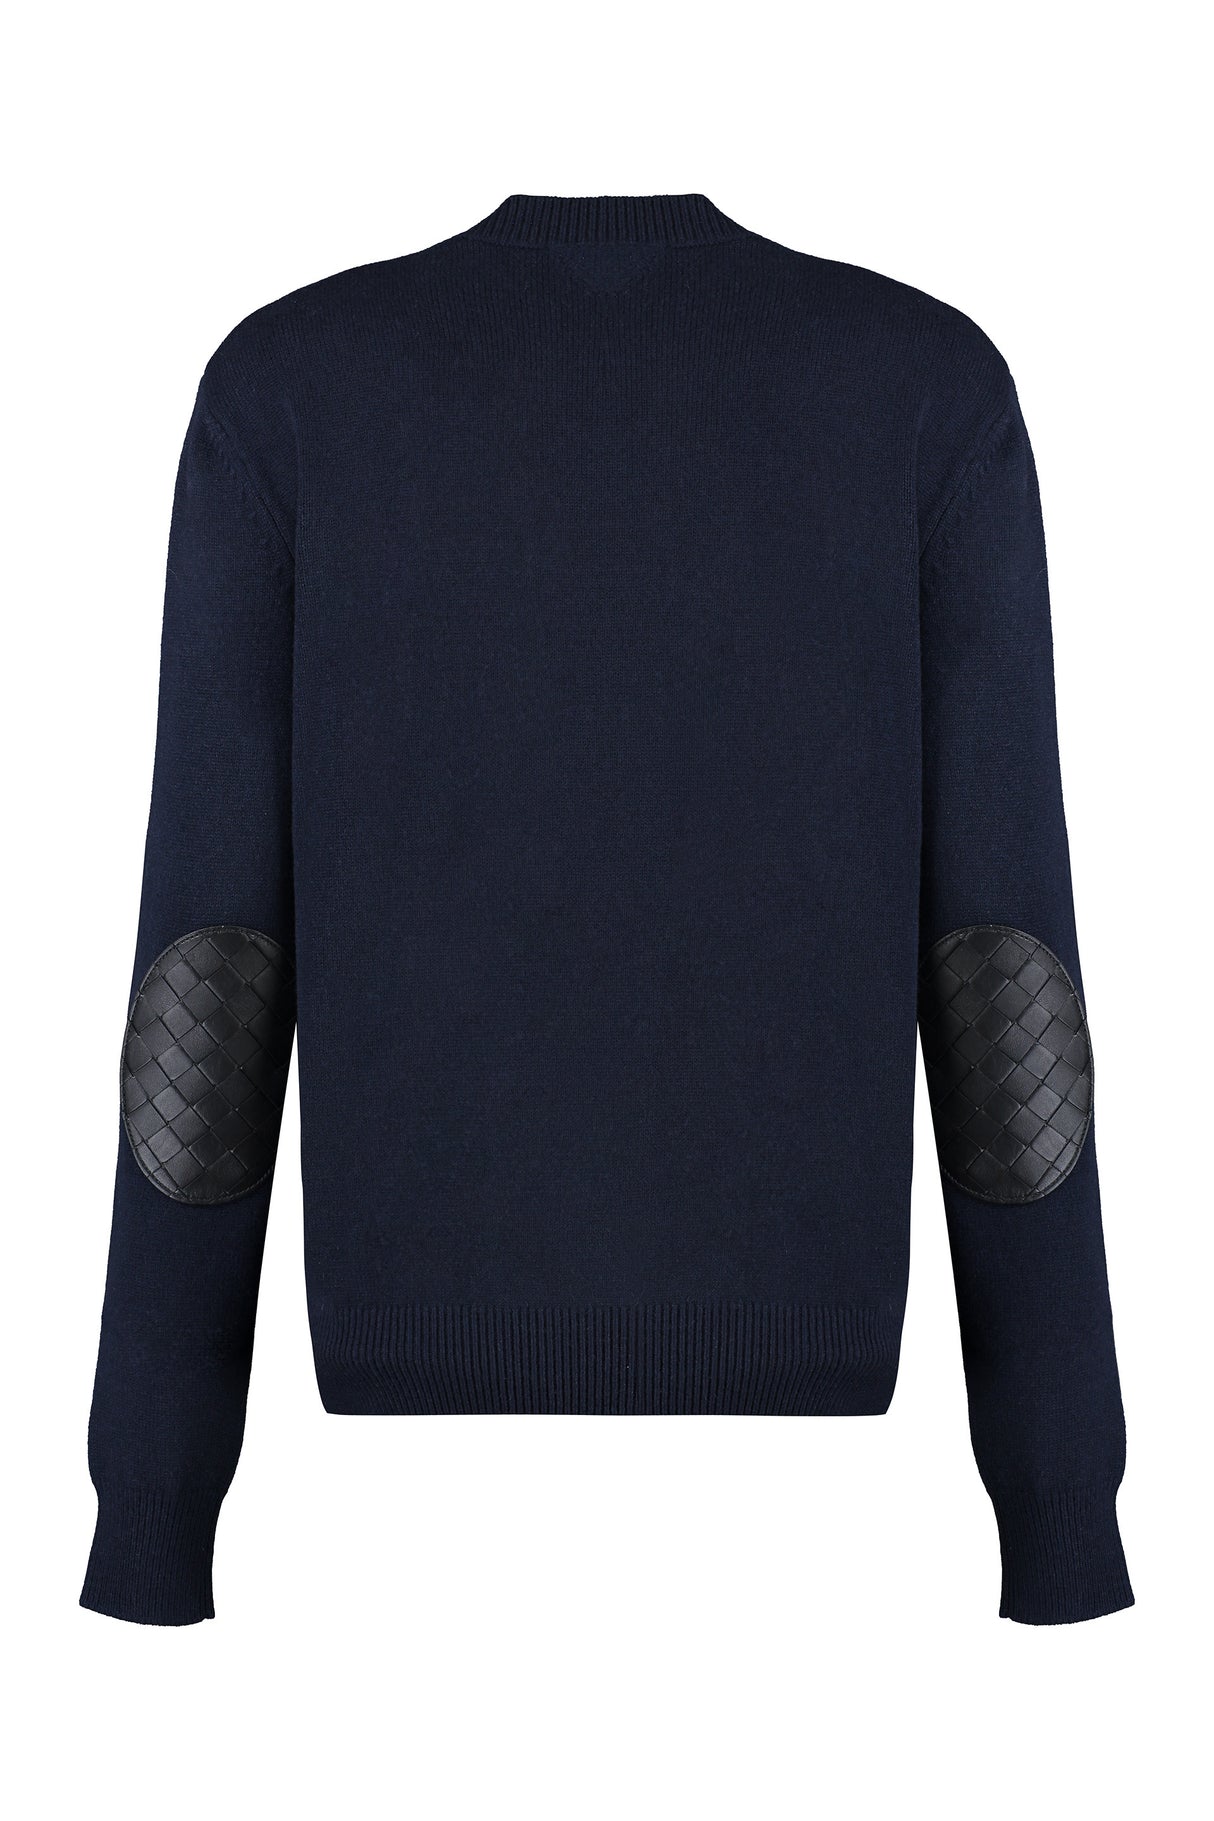 BOTTEGA VENETA Luxurious Cashmere Sweater with Leather Elbow Patches and Ribbed Edges